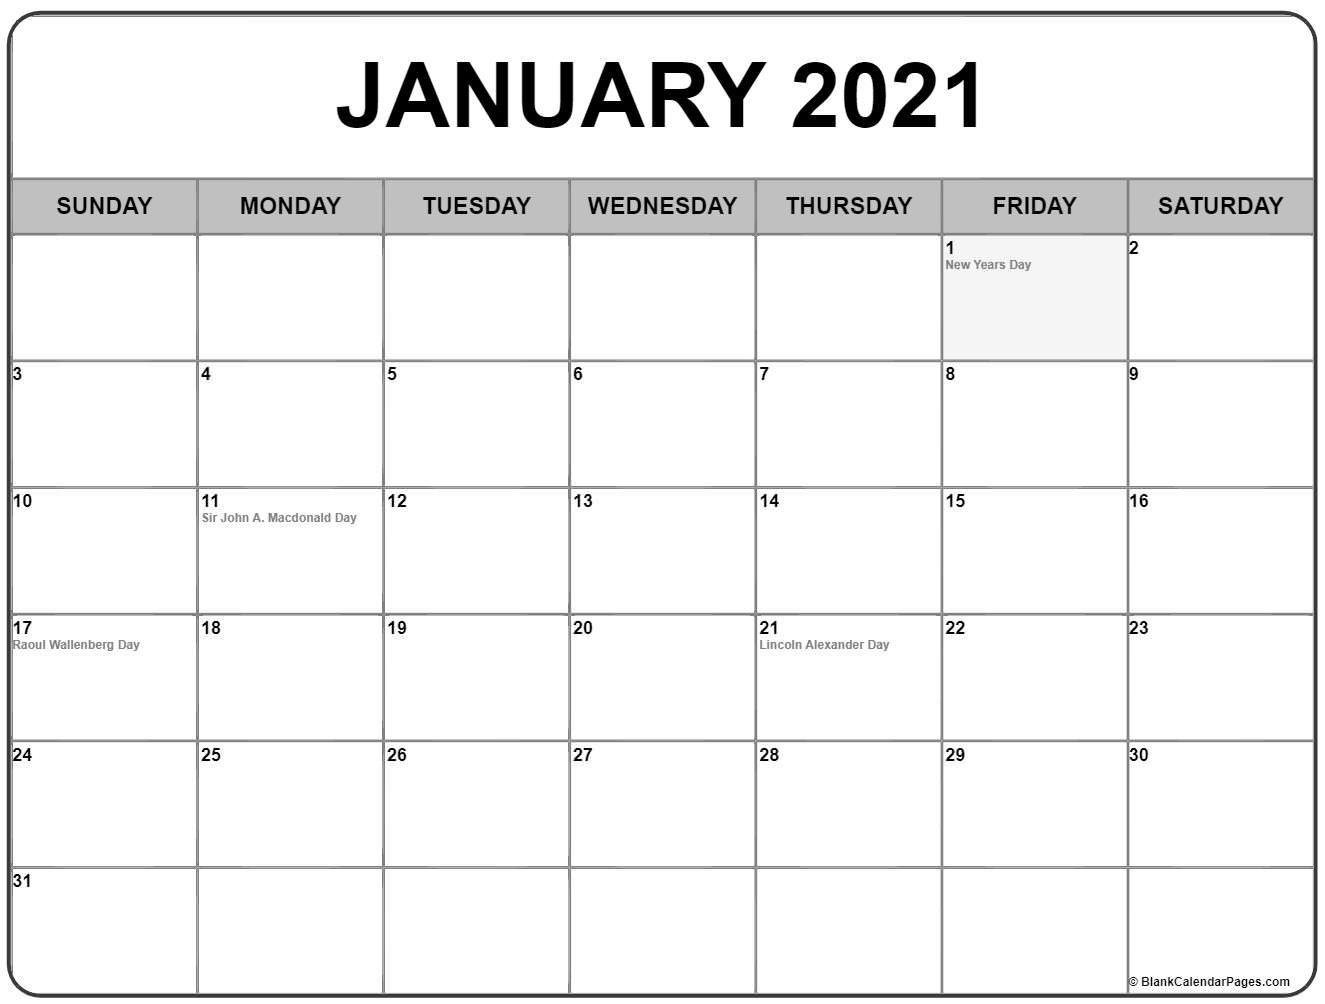 Collection Of January 2021 Calendars With Holidays